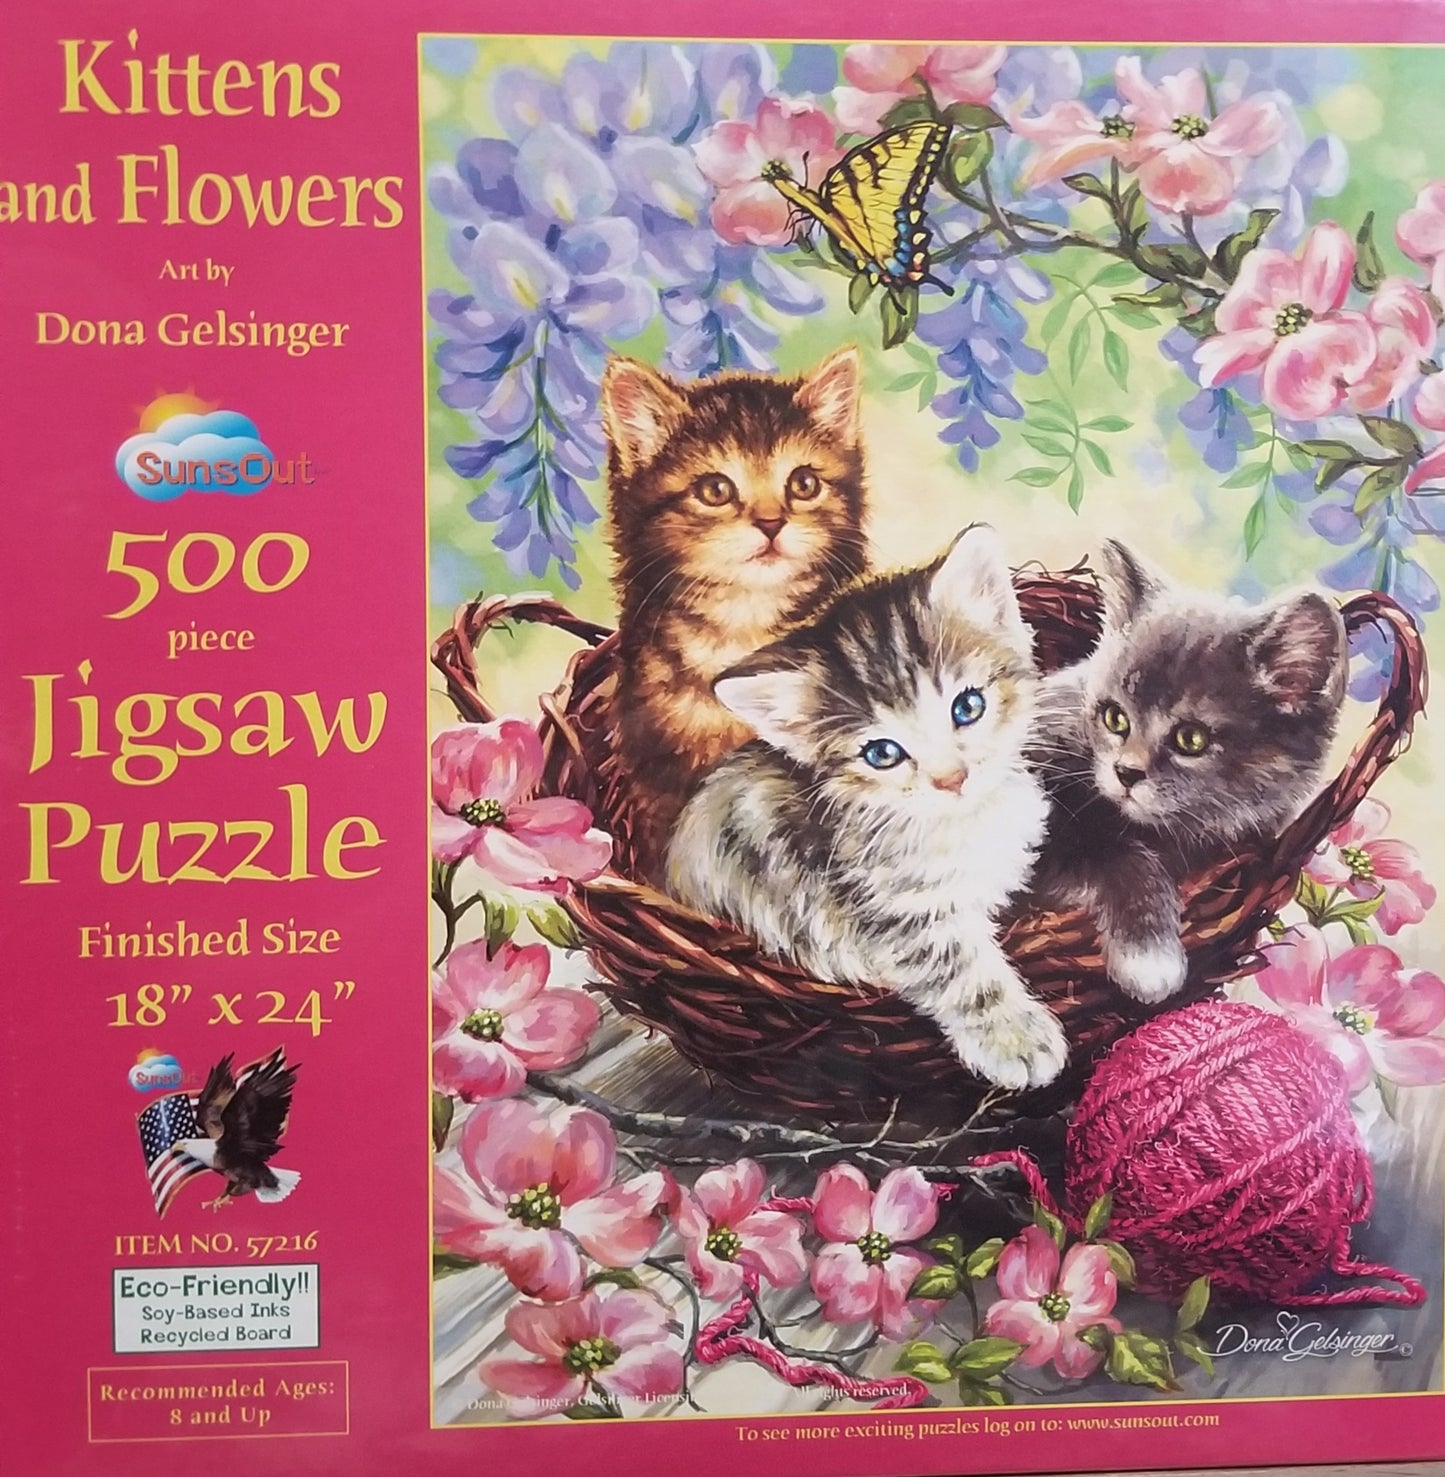 Kittens and Flowers by Dona Gelsinger, 500 Piece puzzle